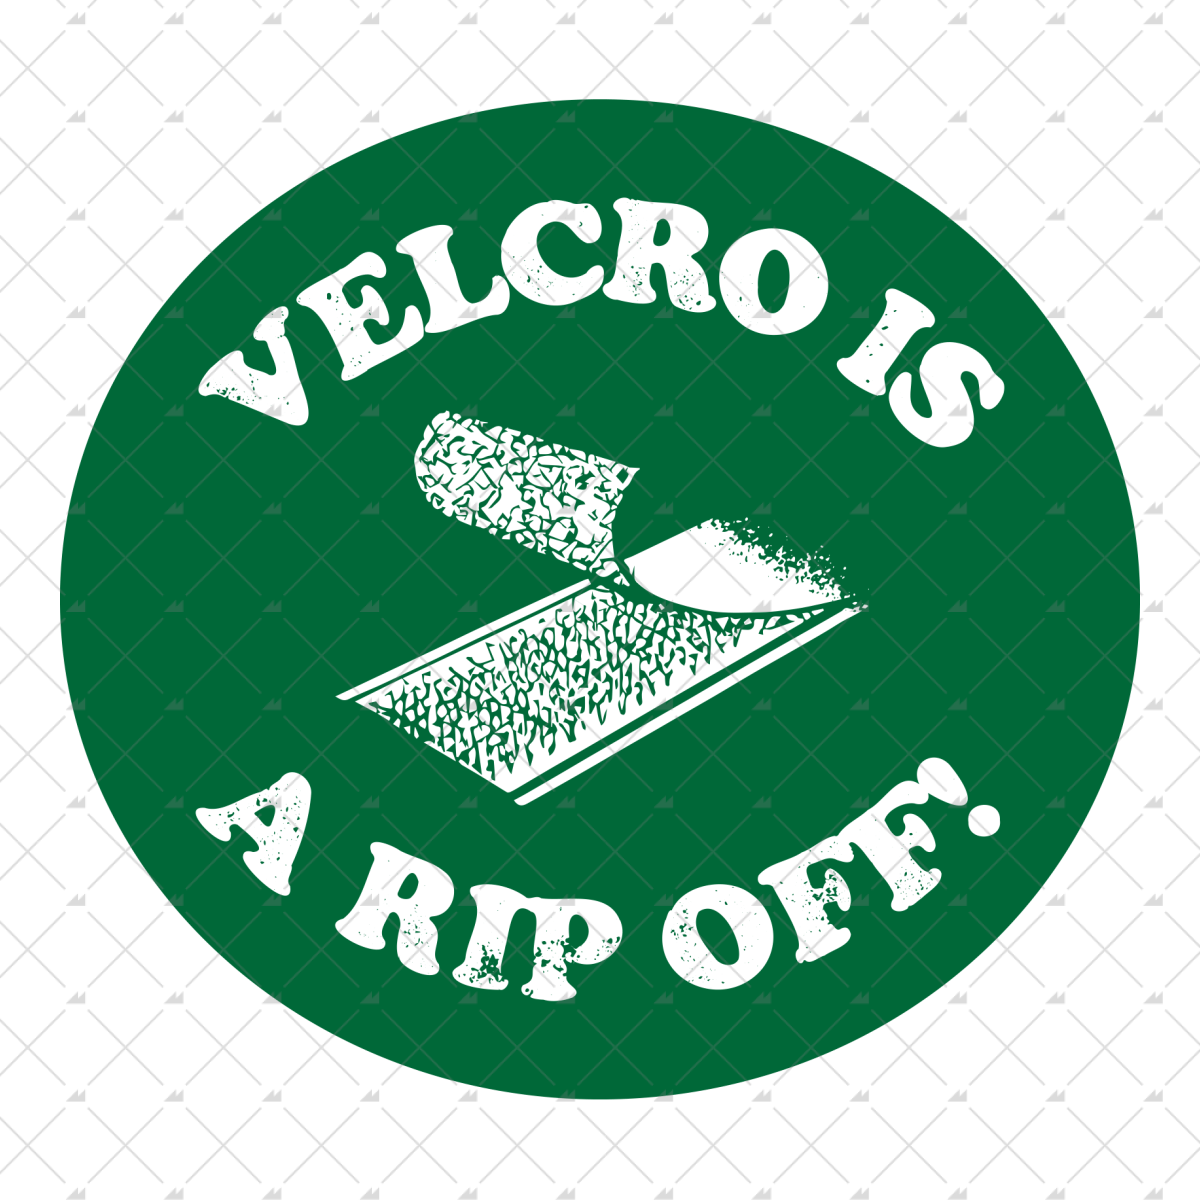 Velcro is a Rip Off - Sticker